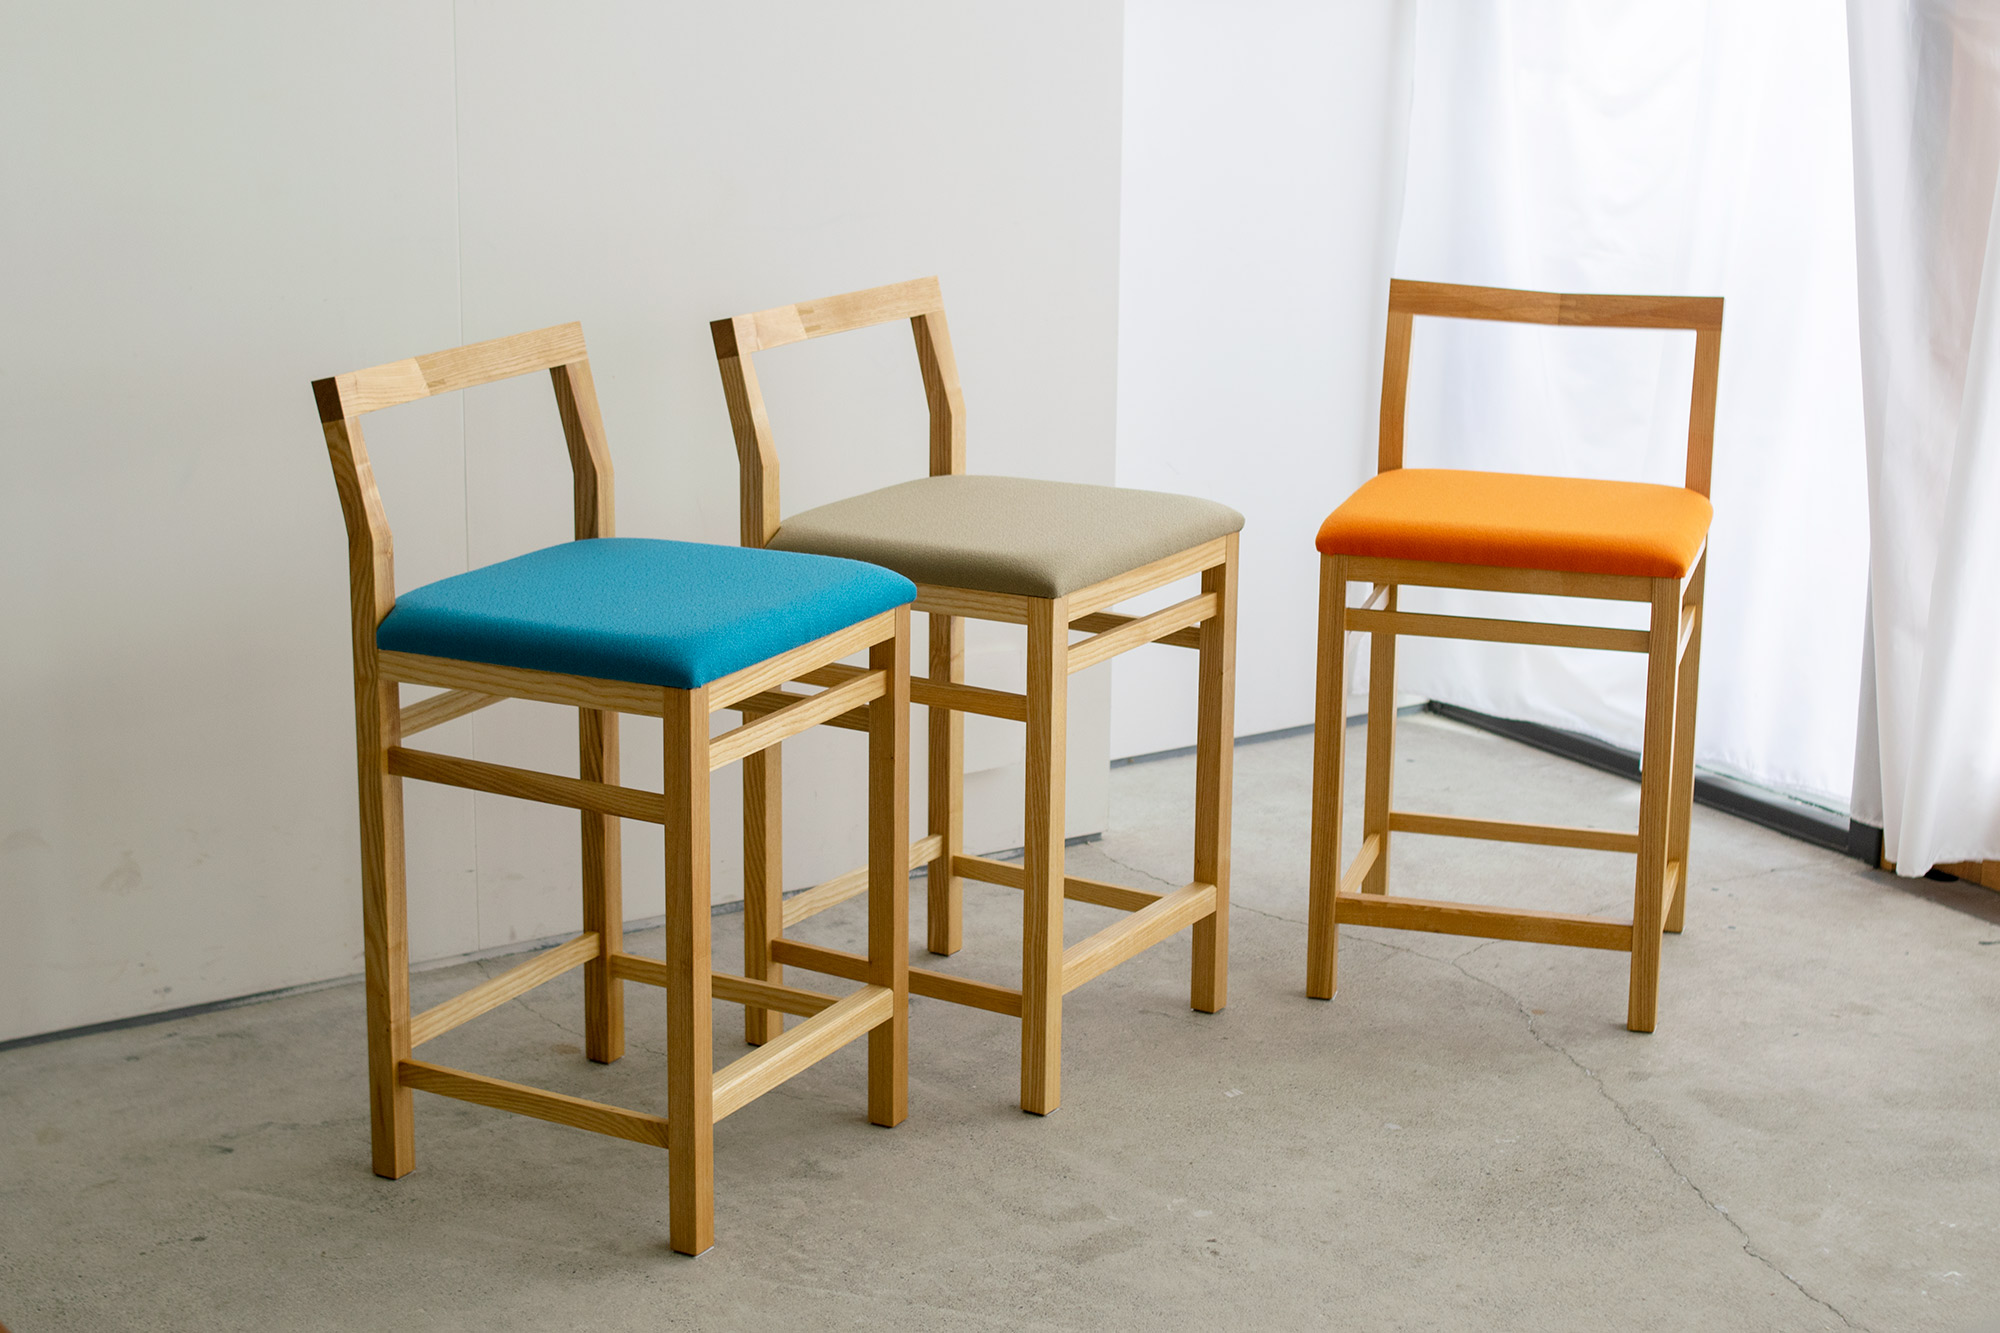 Hight type pico chair